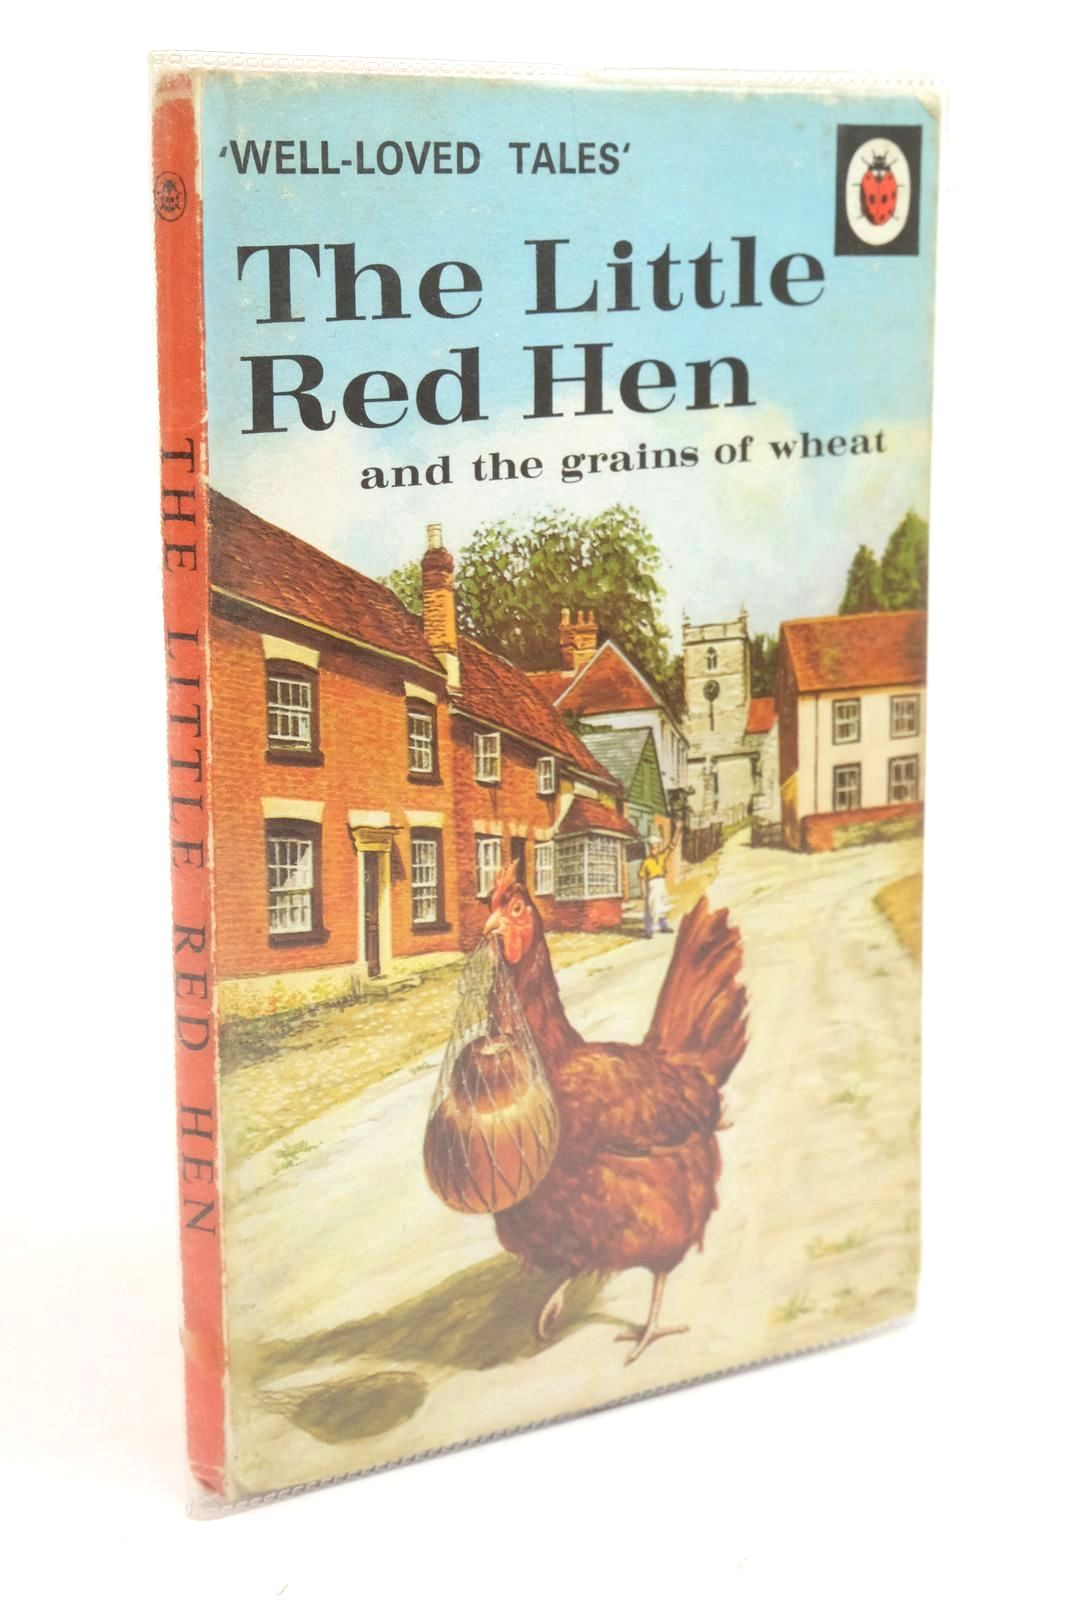 Photo of THE LITTLE RED HEN AND THE GRAINS OF WHEAT written by Southgate, Vera illustrated by Lumley, Robert published by Wills &amp; Hepworth Ltd. (STOCK CODE: 1322380)  for sale by Stella & Rose's Books